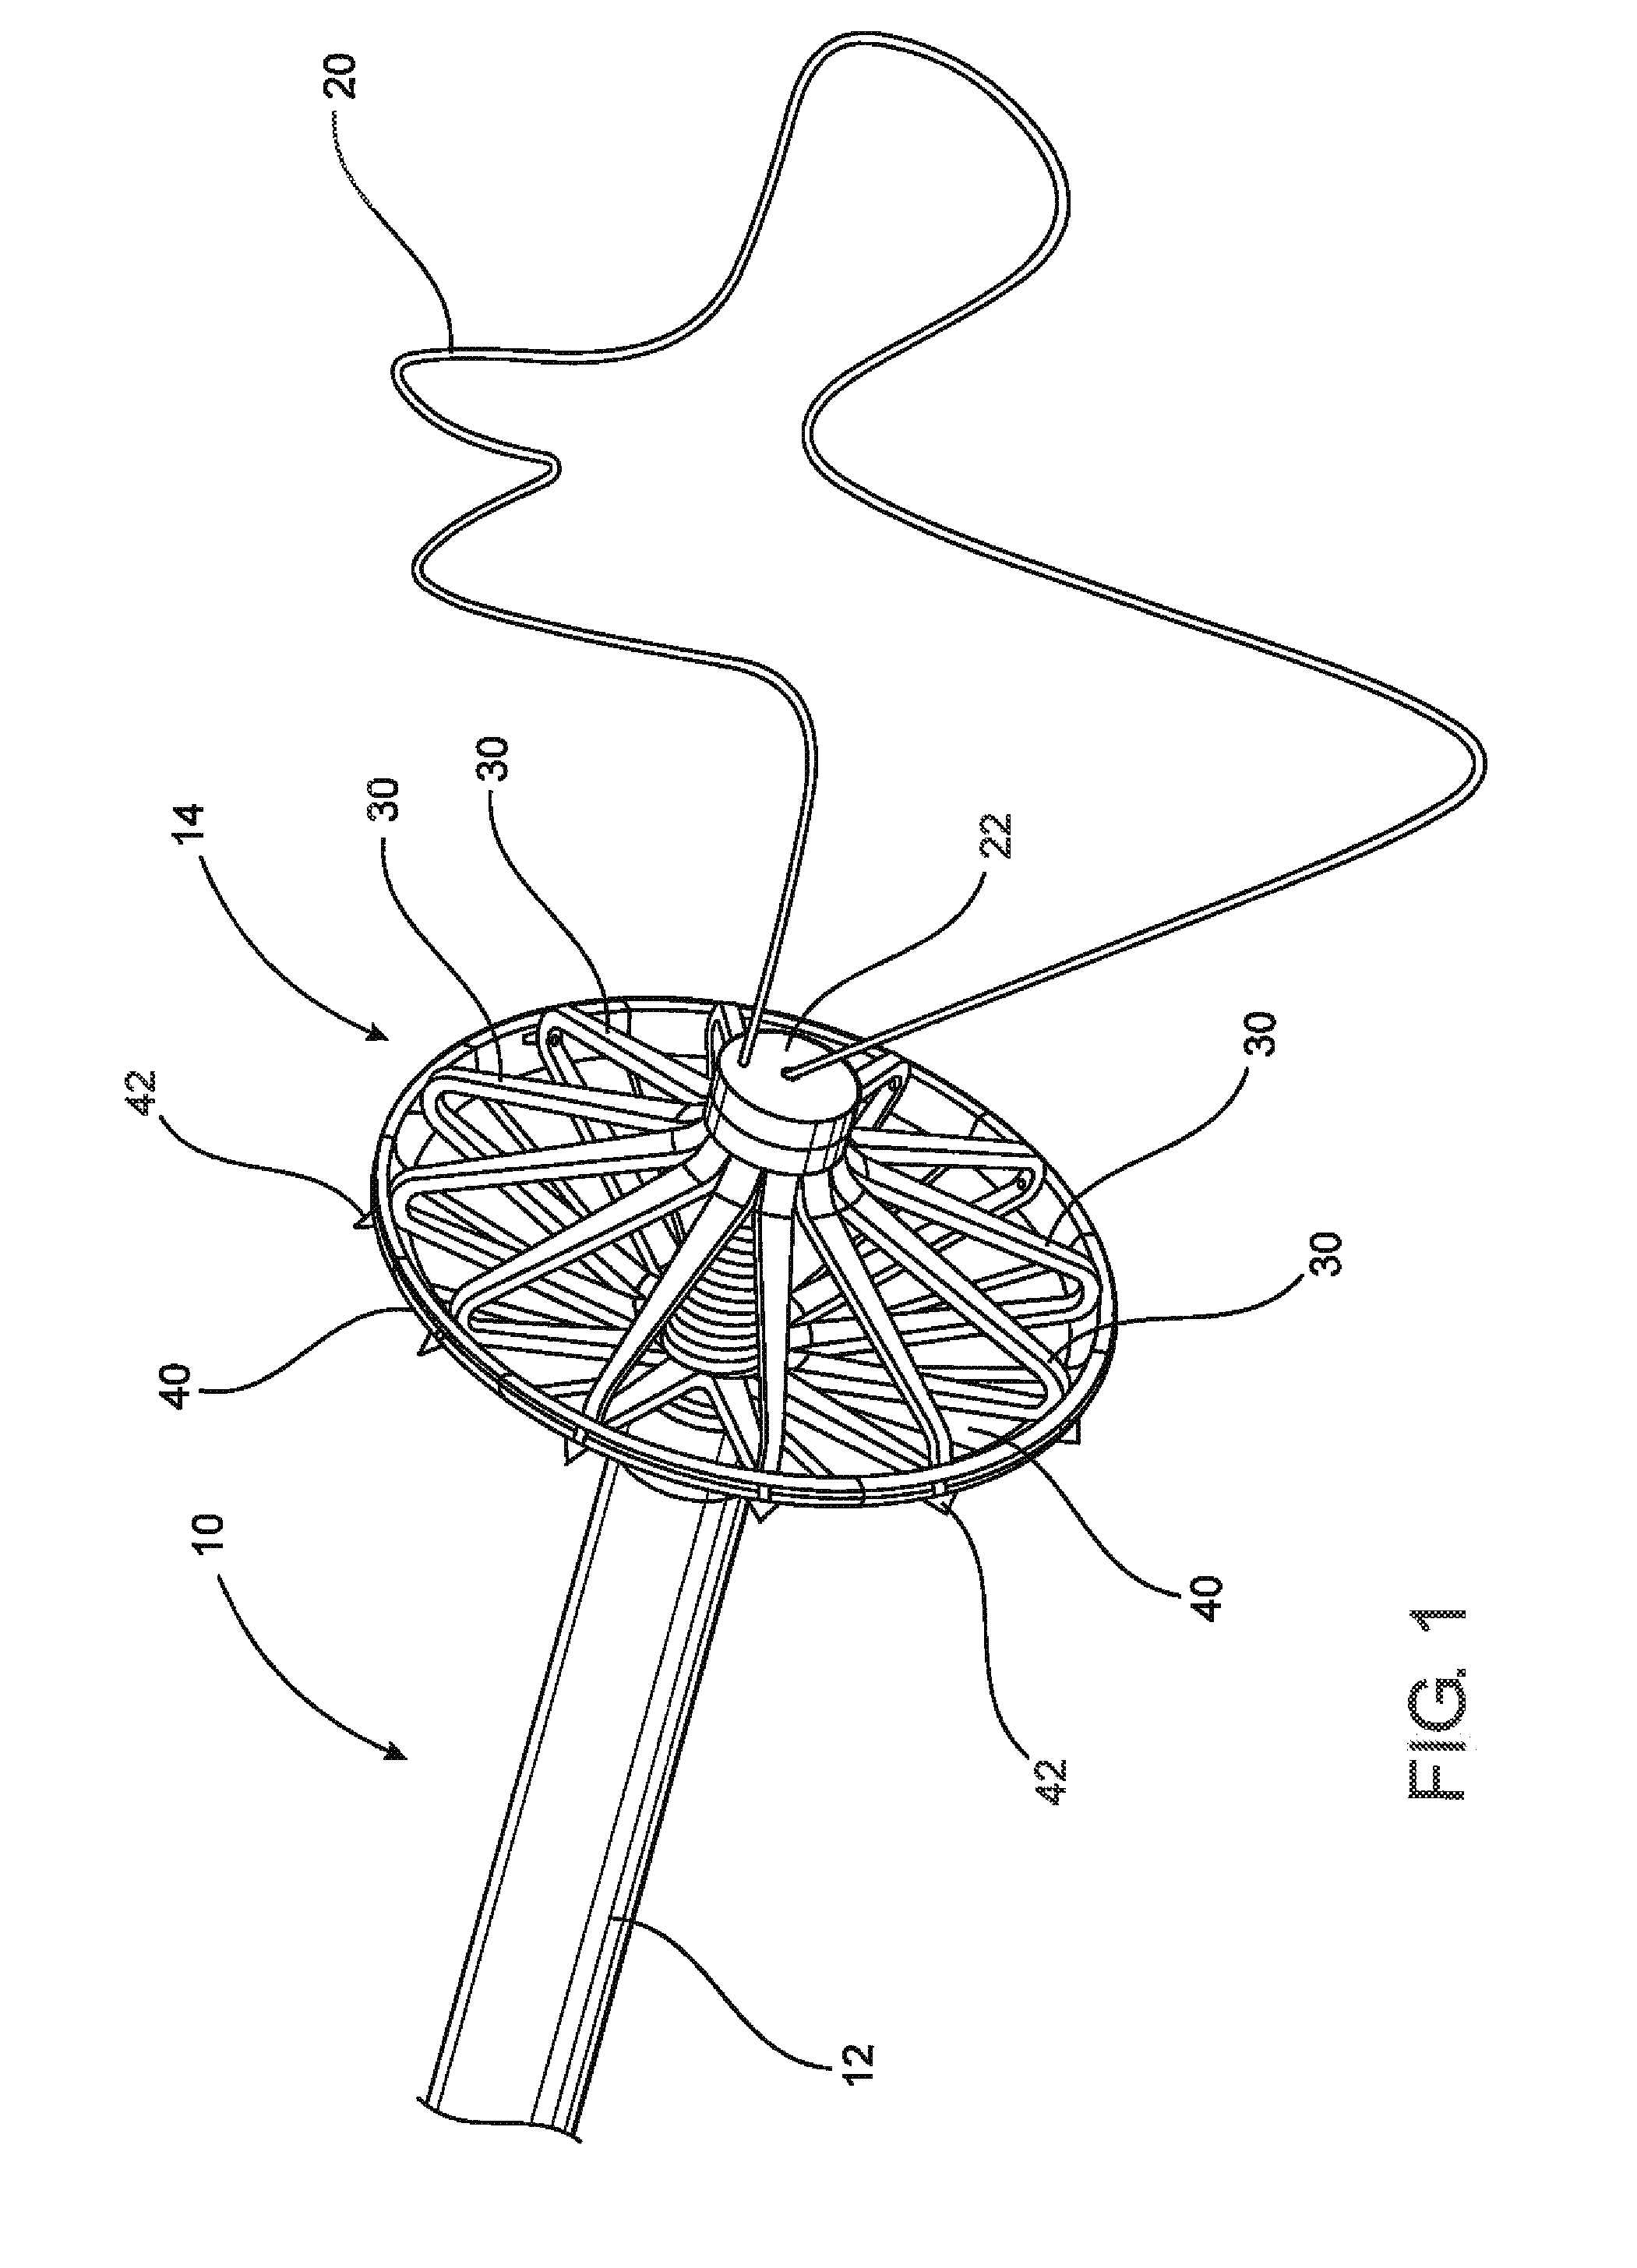 Assembly and method for left atrial appendage occlusion